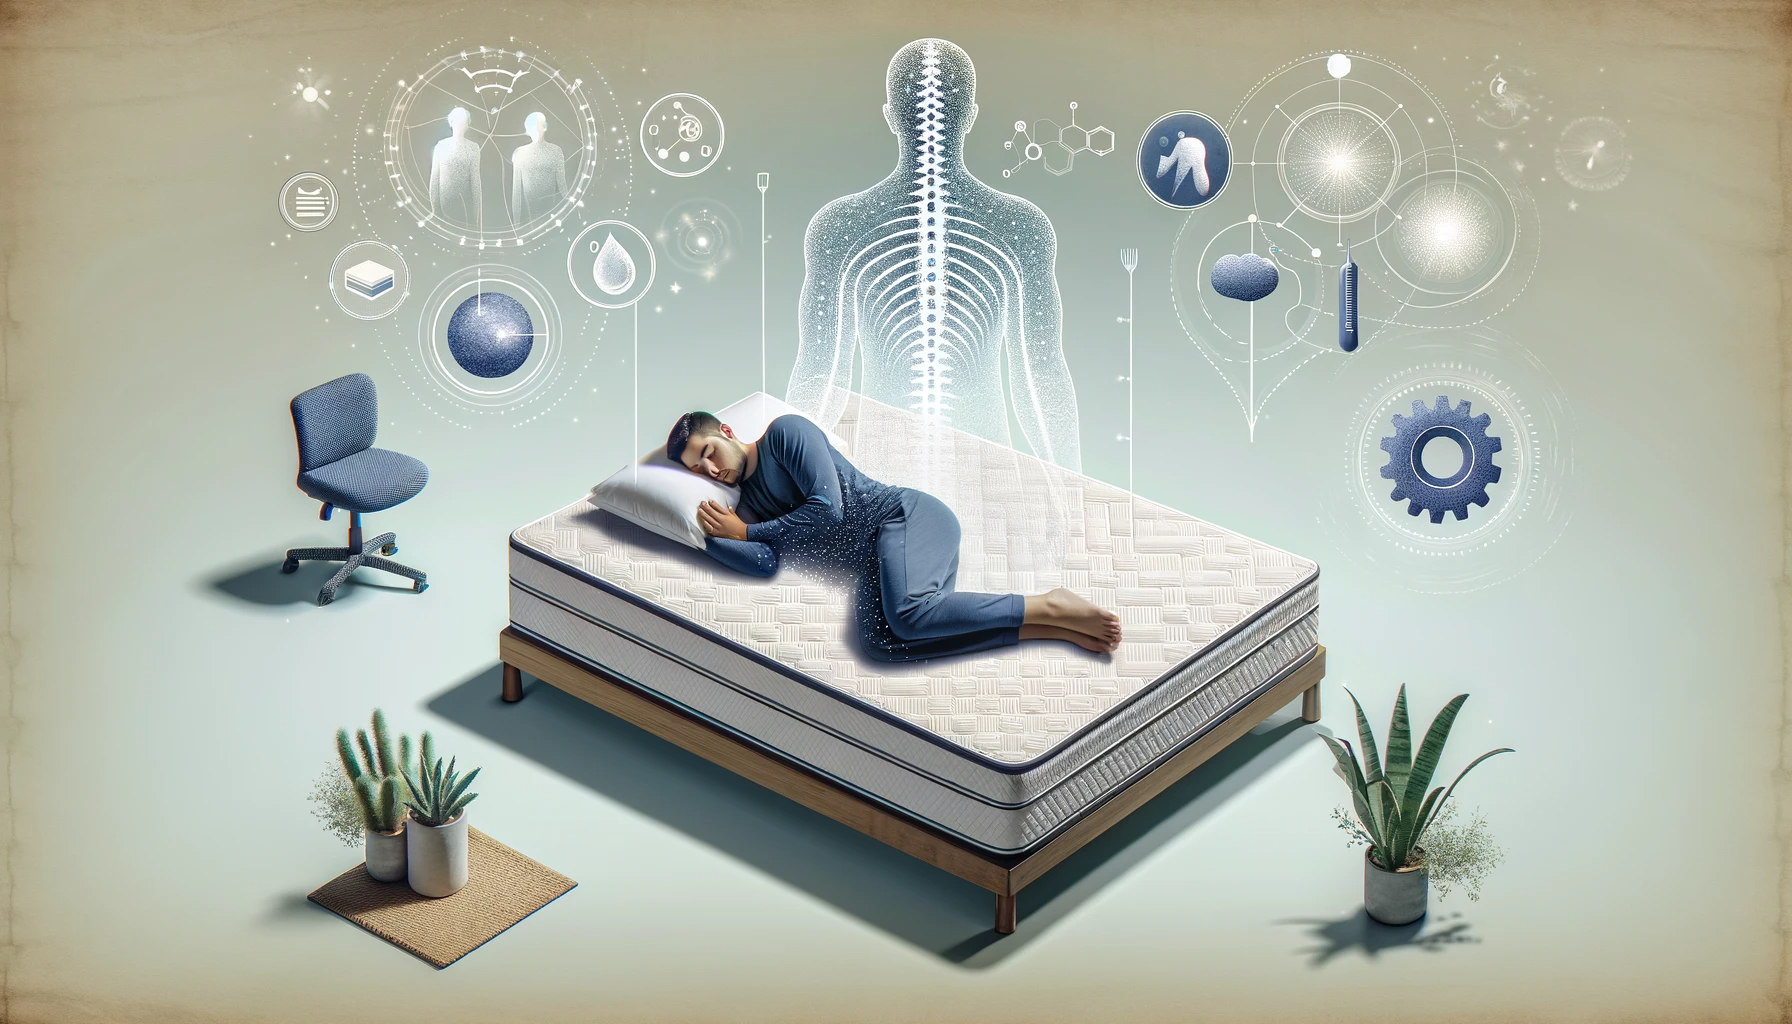 This image features a person sleeping peacefully on a high-tech mattress, surrounded by visual elements that symbolize the health benefits such as reduced stress, better posture, and overall well-being. The tranquil and restful setting emphasizes the improvements in health and lifestyle brought about by modern mattress technologies.